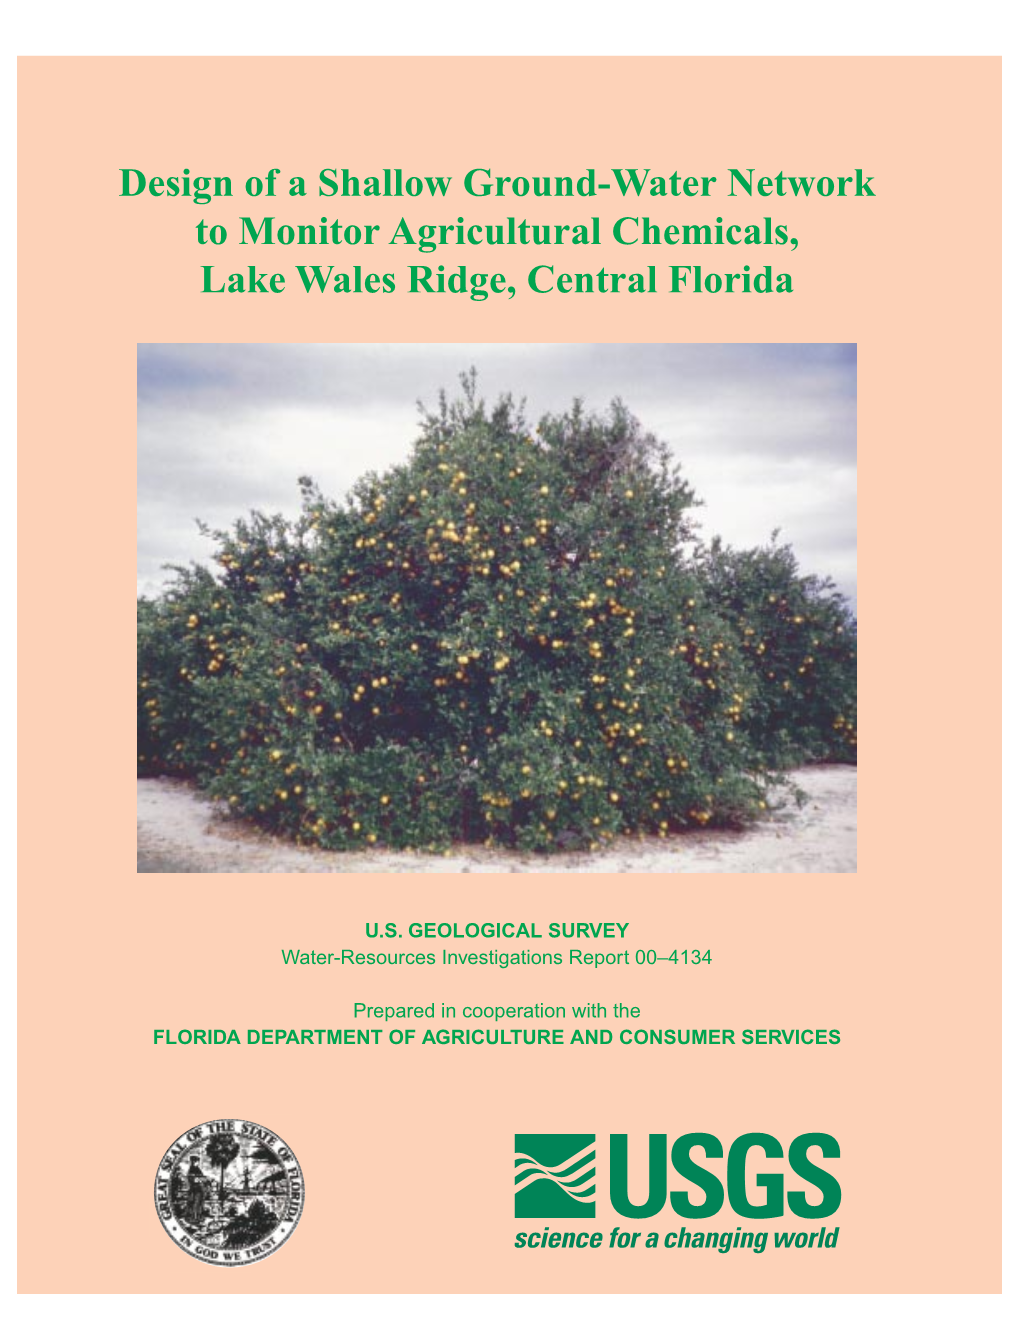 Design of a Shallow Ground-Water Network to Monitor Agricultural Chemicals, Lake Wales Ridge, Central Florida